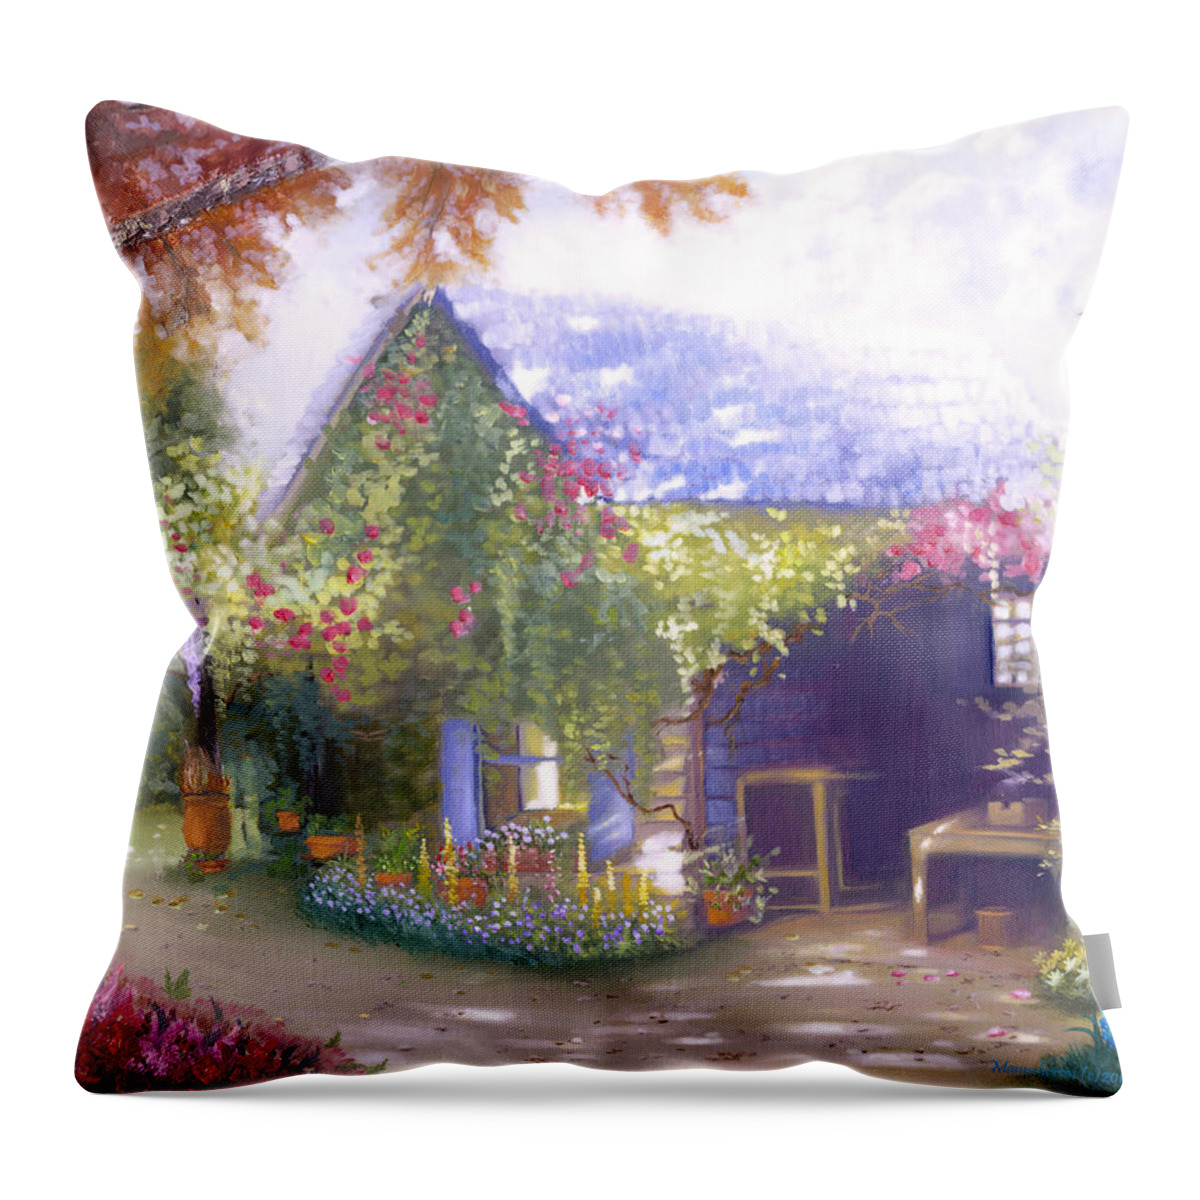 Daylesford Cottage Throw Pillow featuring the painting Daylesford Cottage by Melissa Herrin